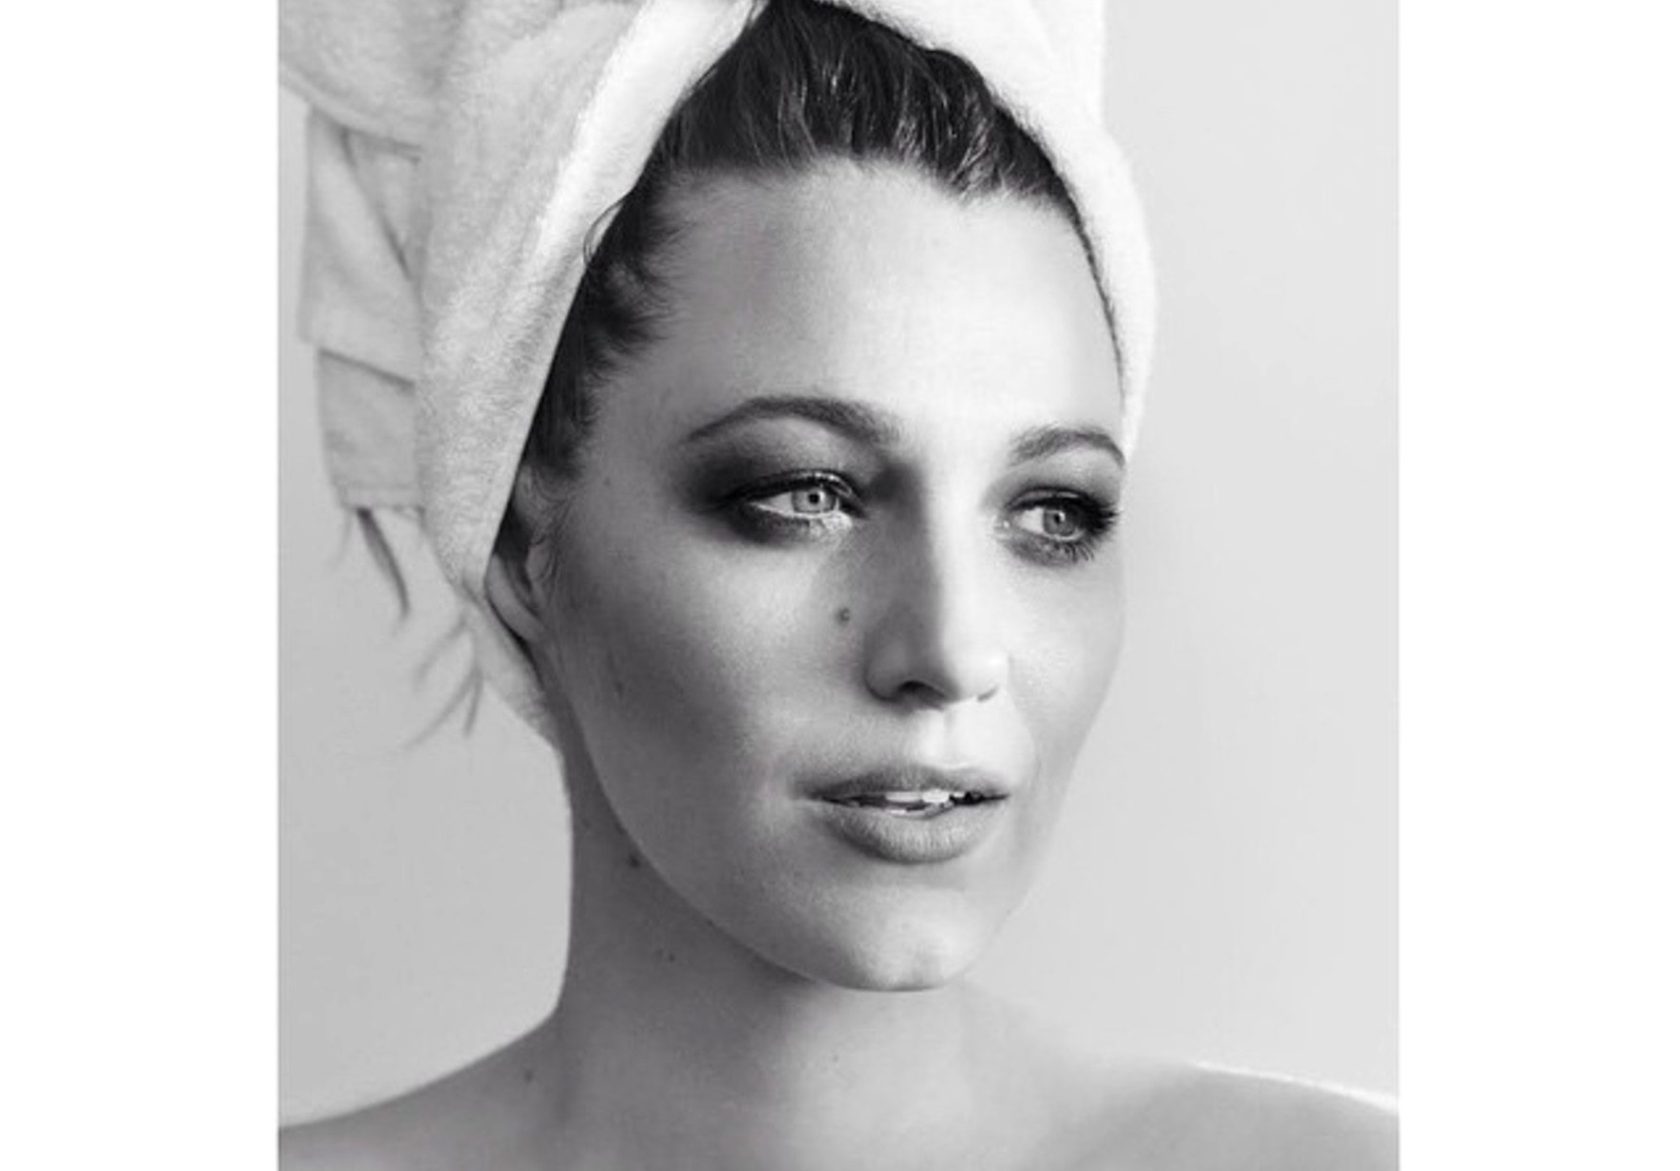 Mario Testino "Towel series 72, Blake Lively", Image: 238558685, License: Rights-managed, Restrictions: , Model Release: no, Credit line: Profimedia, Face To Face A